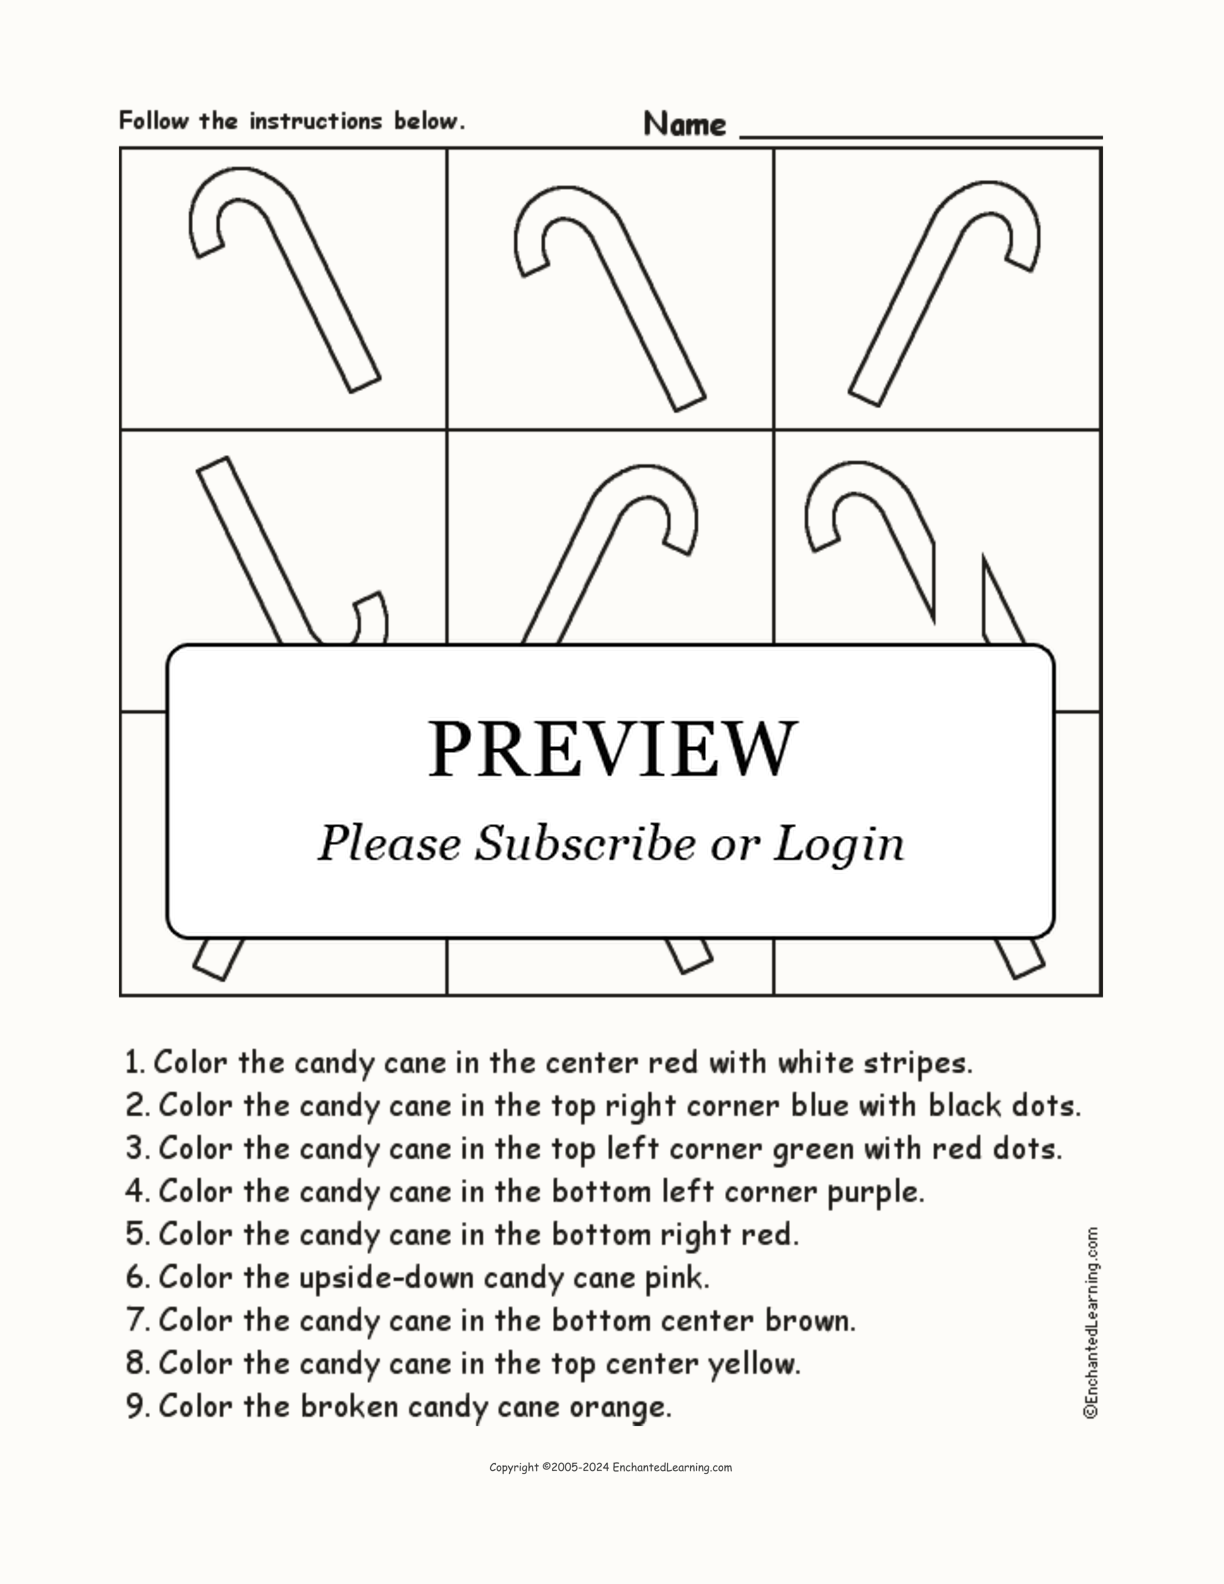 Candy Canes - Follow the Instructions interactive worksheet page 1